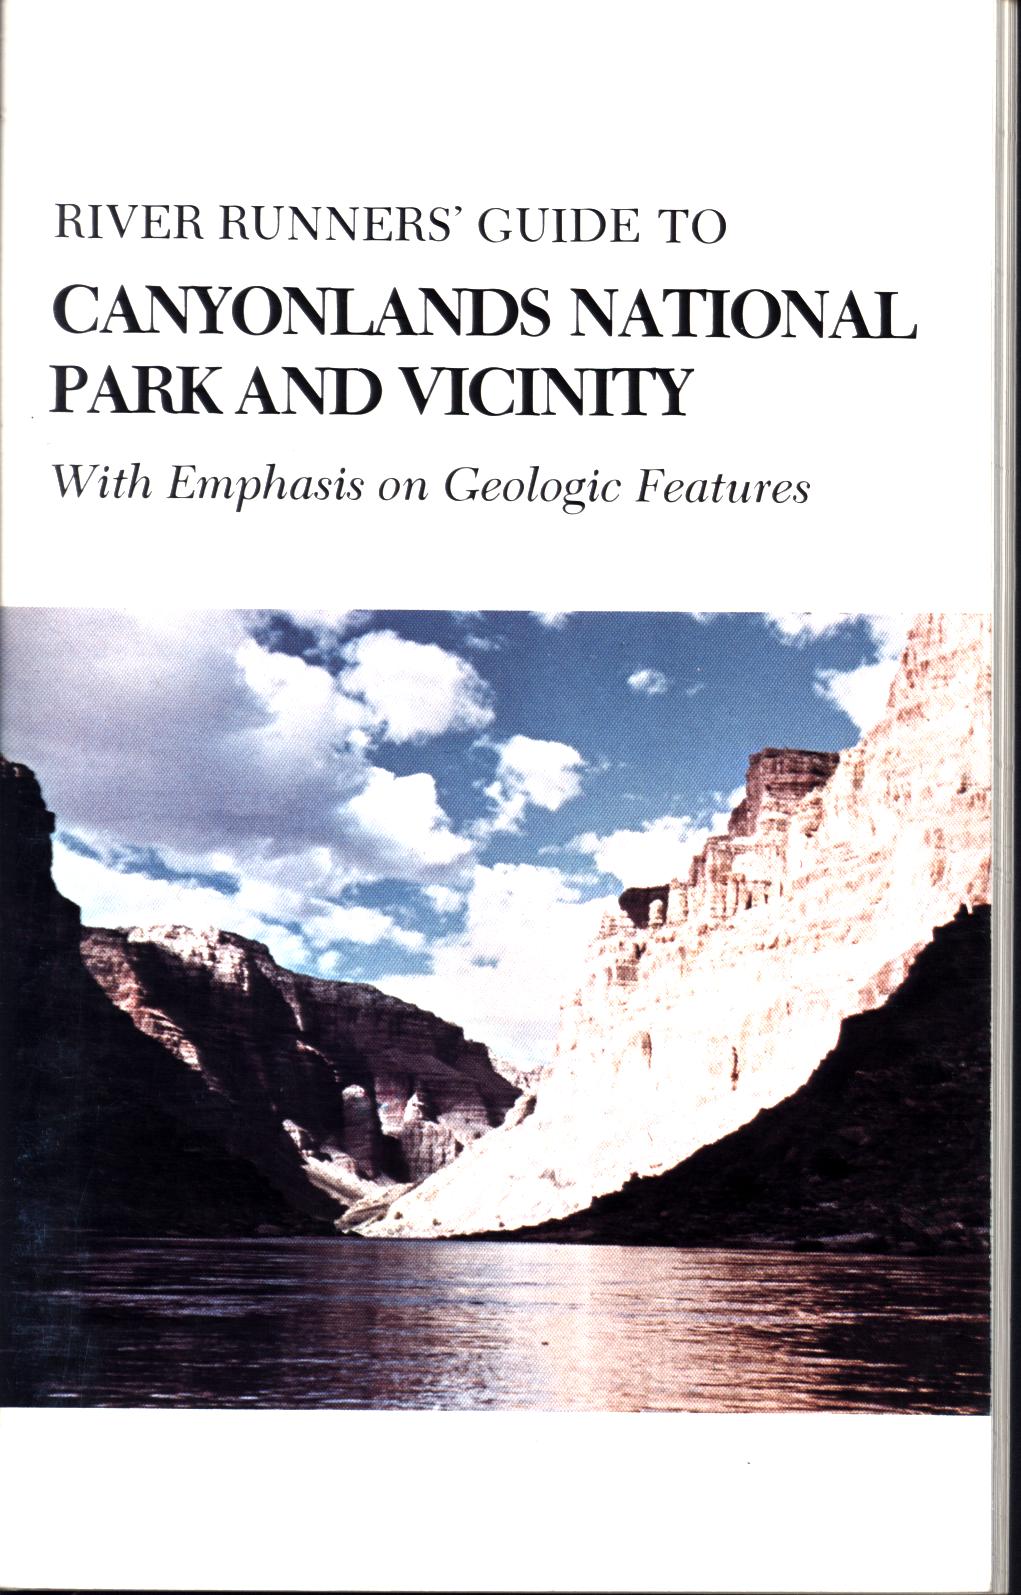 RIVER RUNNER'S GUIDE TO CANYONLANDS NATIONAL PARK & VICINITY: with emphasis on geologic features. 